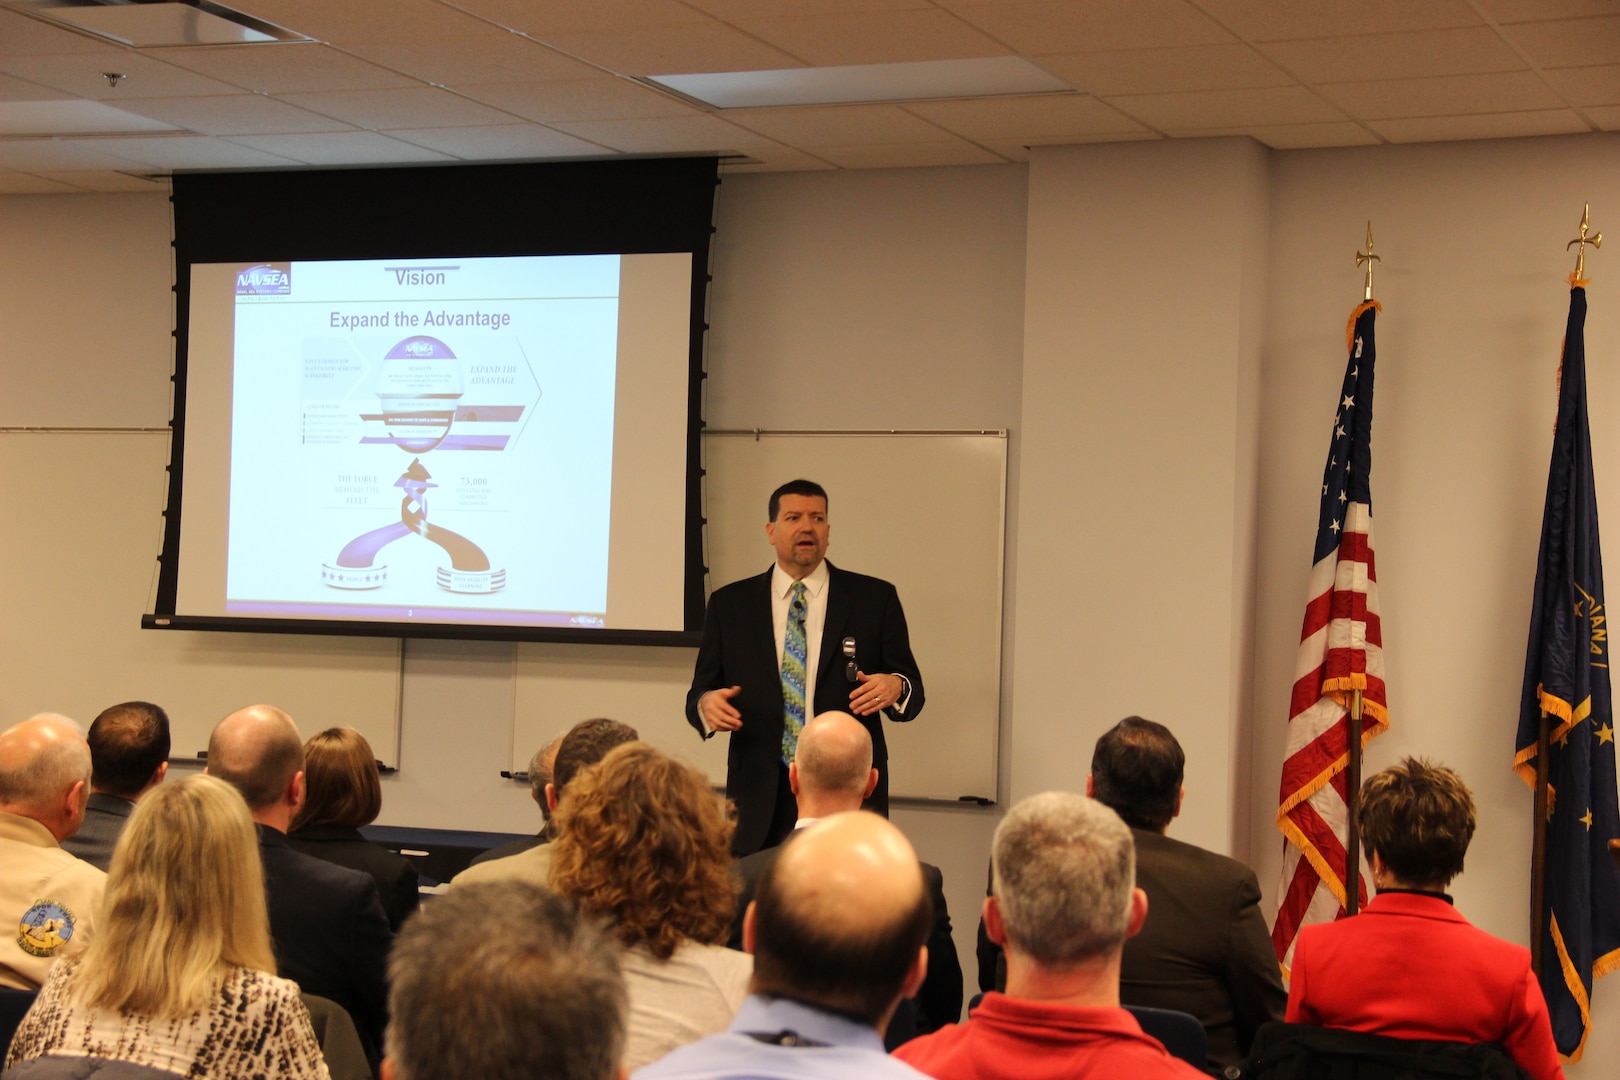 CRANE, Ind. – Mr. Jim Smerchansky, SES, Executive Director at Naval Sea Systems Command speaks to Crane employees during an all-hands meeting on NAVSEA's Campaign Plan to Expand the Advantage.